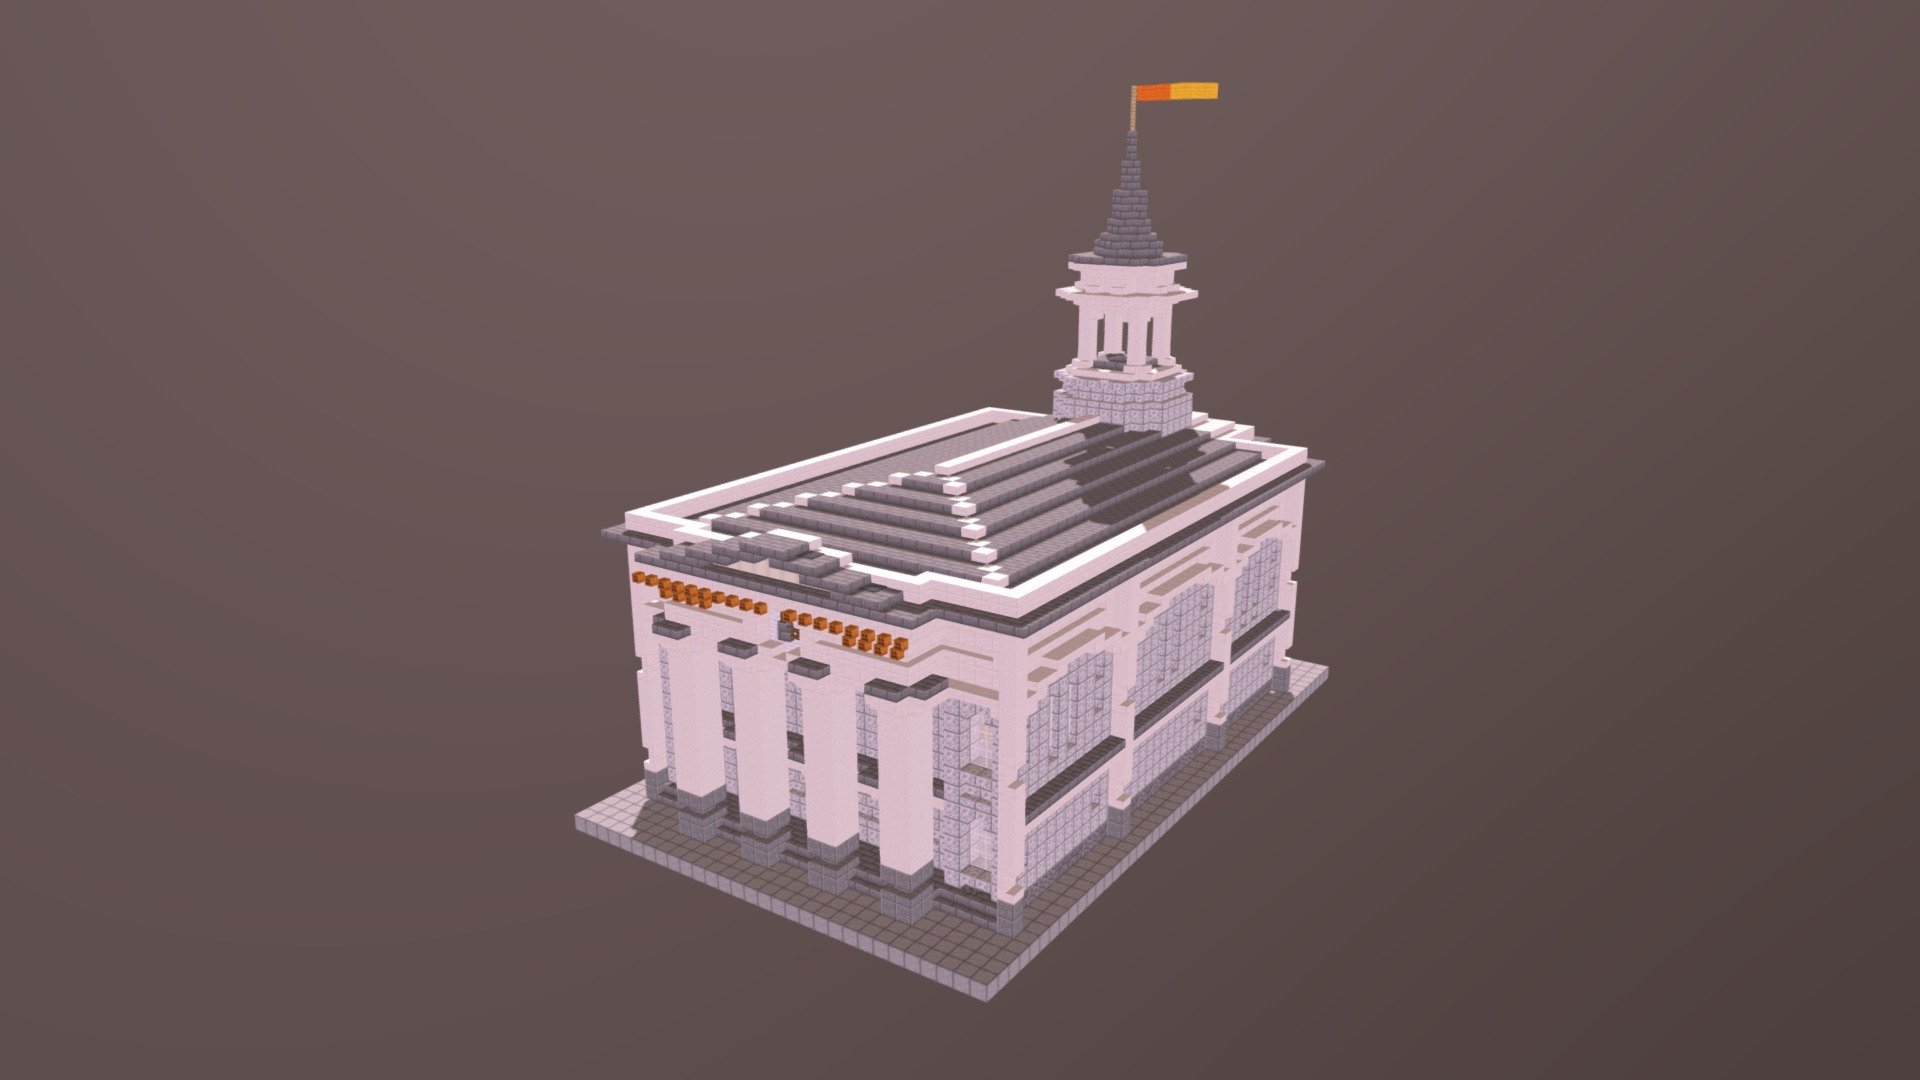 As part of my City Project in Minecraft, I have created this 1790s style town hall. The Town Hall contains offices and a chamber as well as having a clock tower on the front and a bell tower 3d model